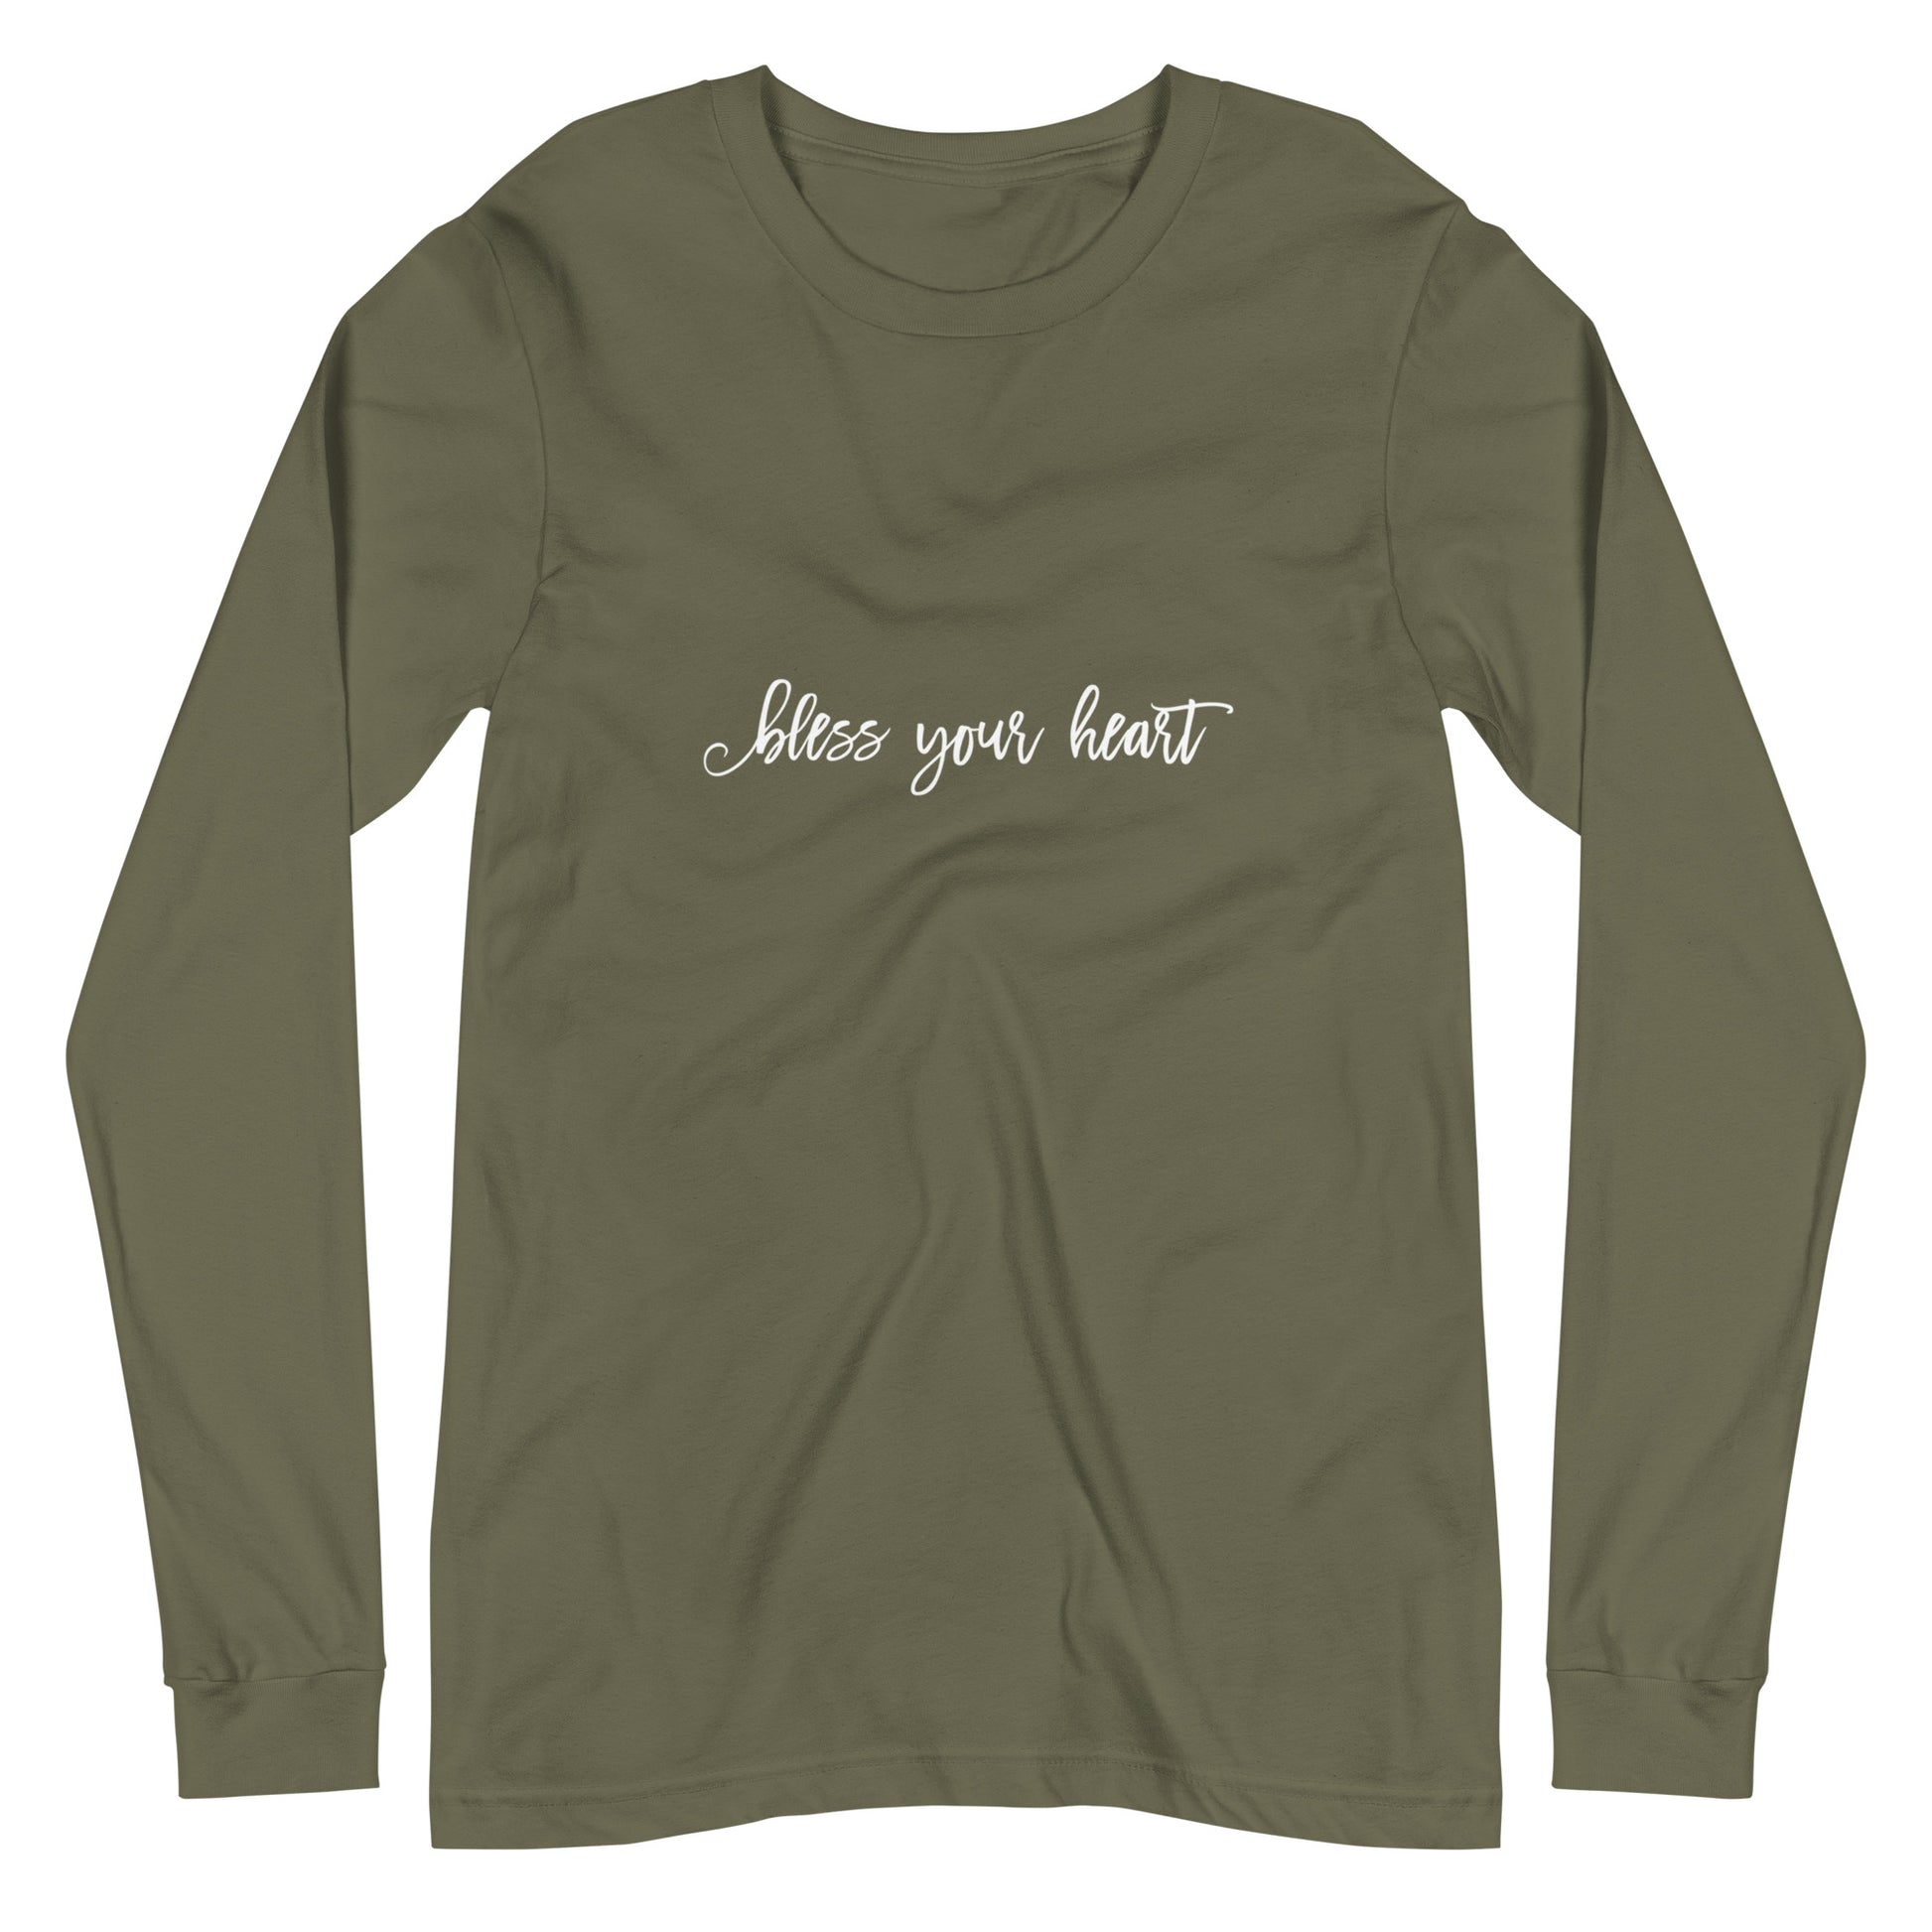 Military Green (olive tan) Dark Grey Heather long-sleeve t-shirt with white graphic in an excessively twee font: "bless your heart"